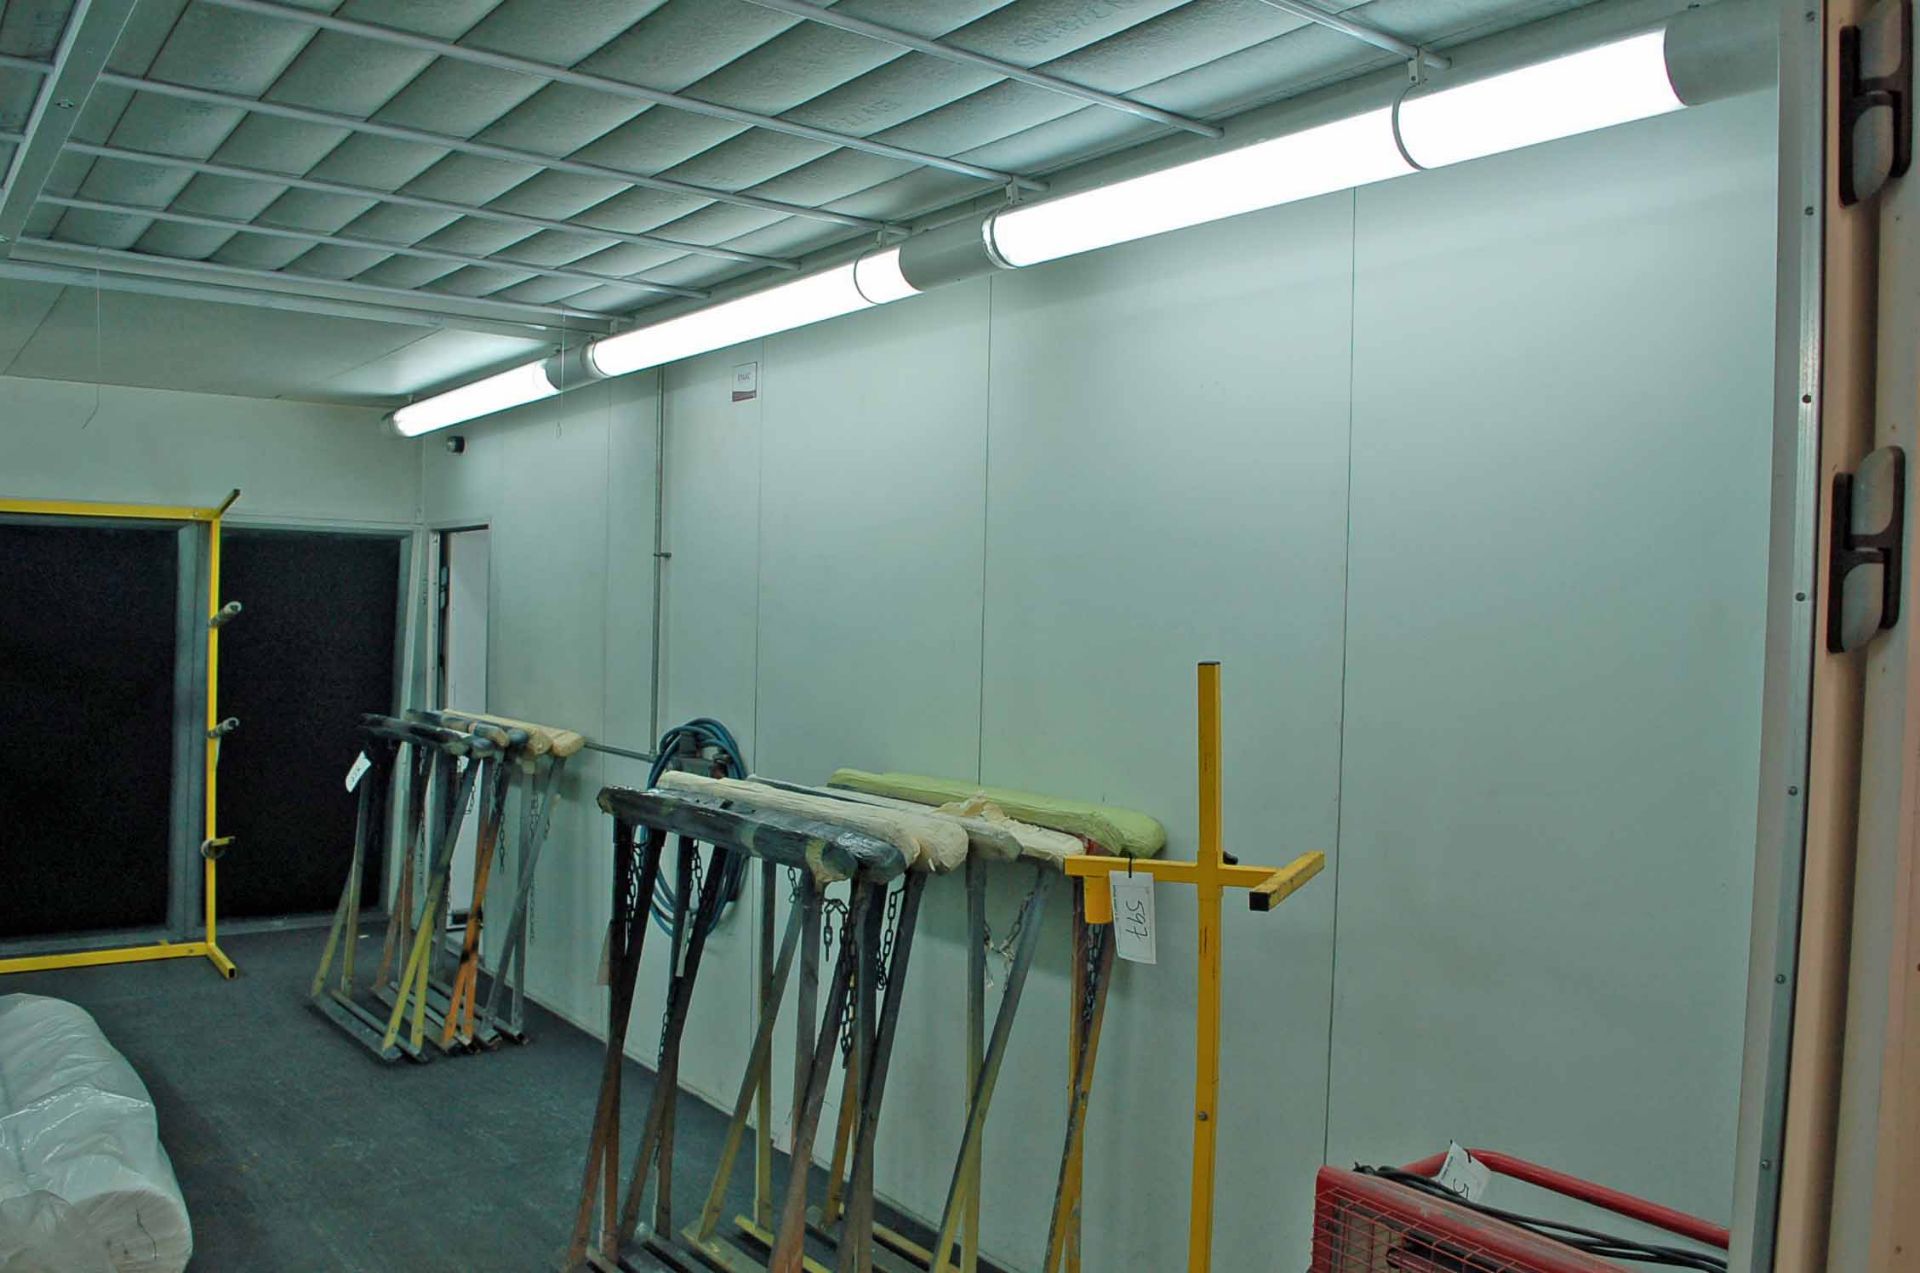 A SPRAYBOOTH TECHNOLOGY SERVICES 7M x 3.5M Approx. Gas Fired Free Standing, Sectional Paint Spray - Image 7 of 19